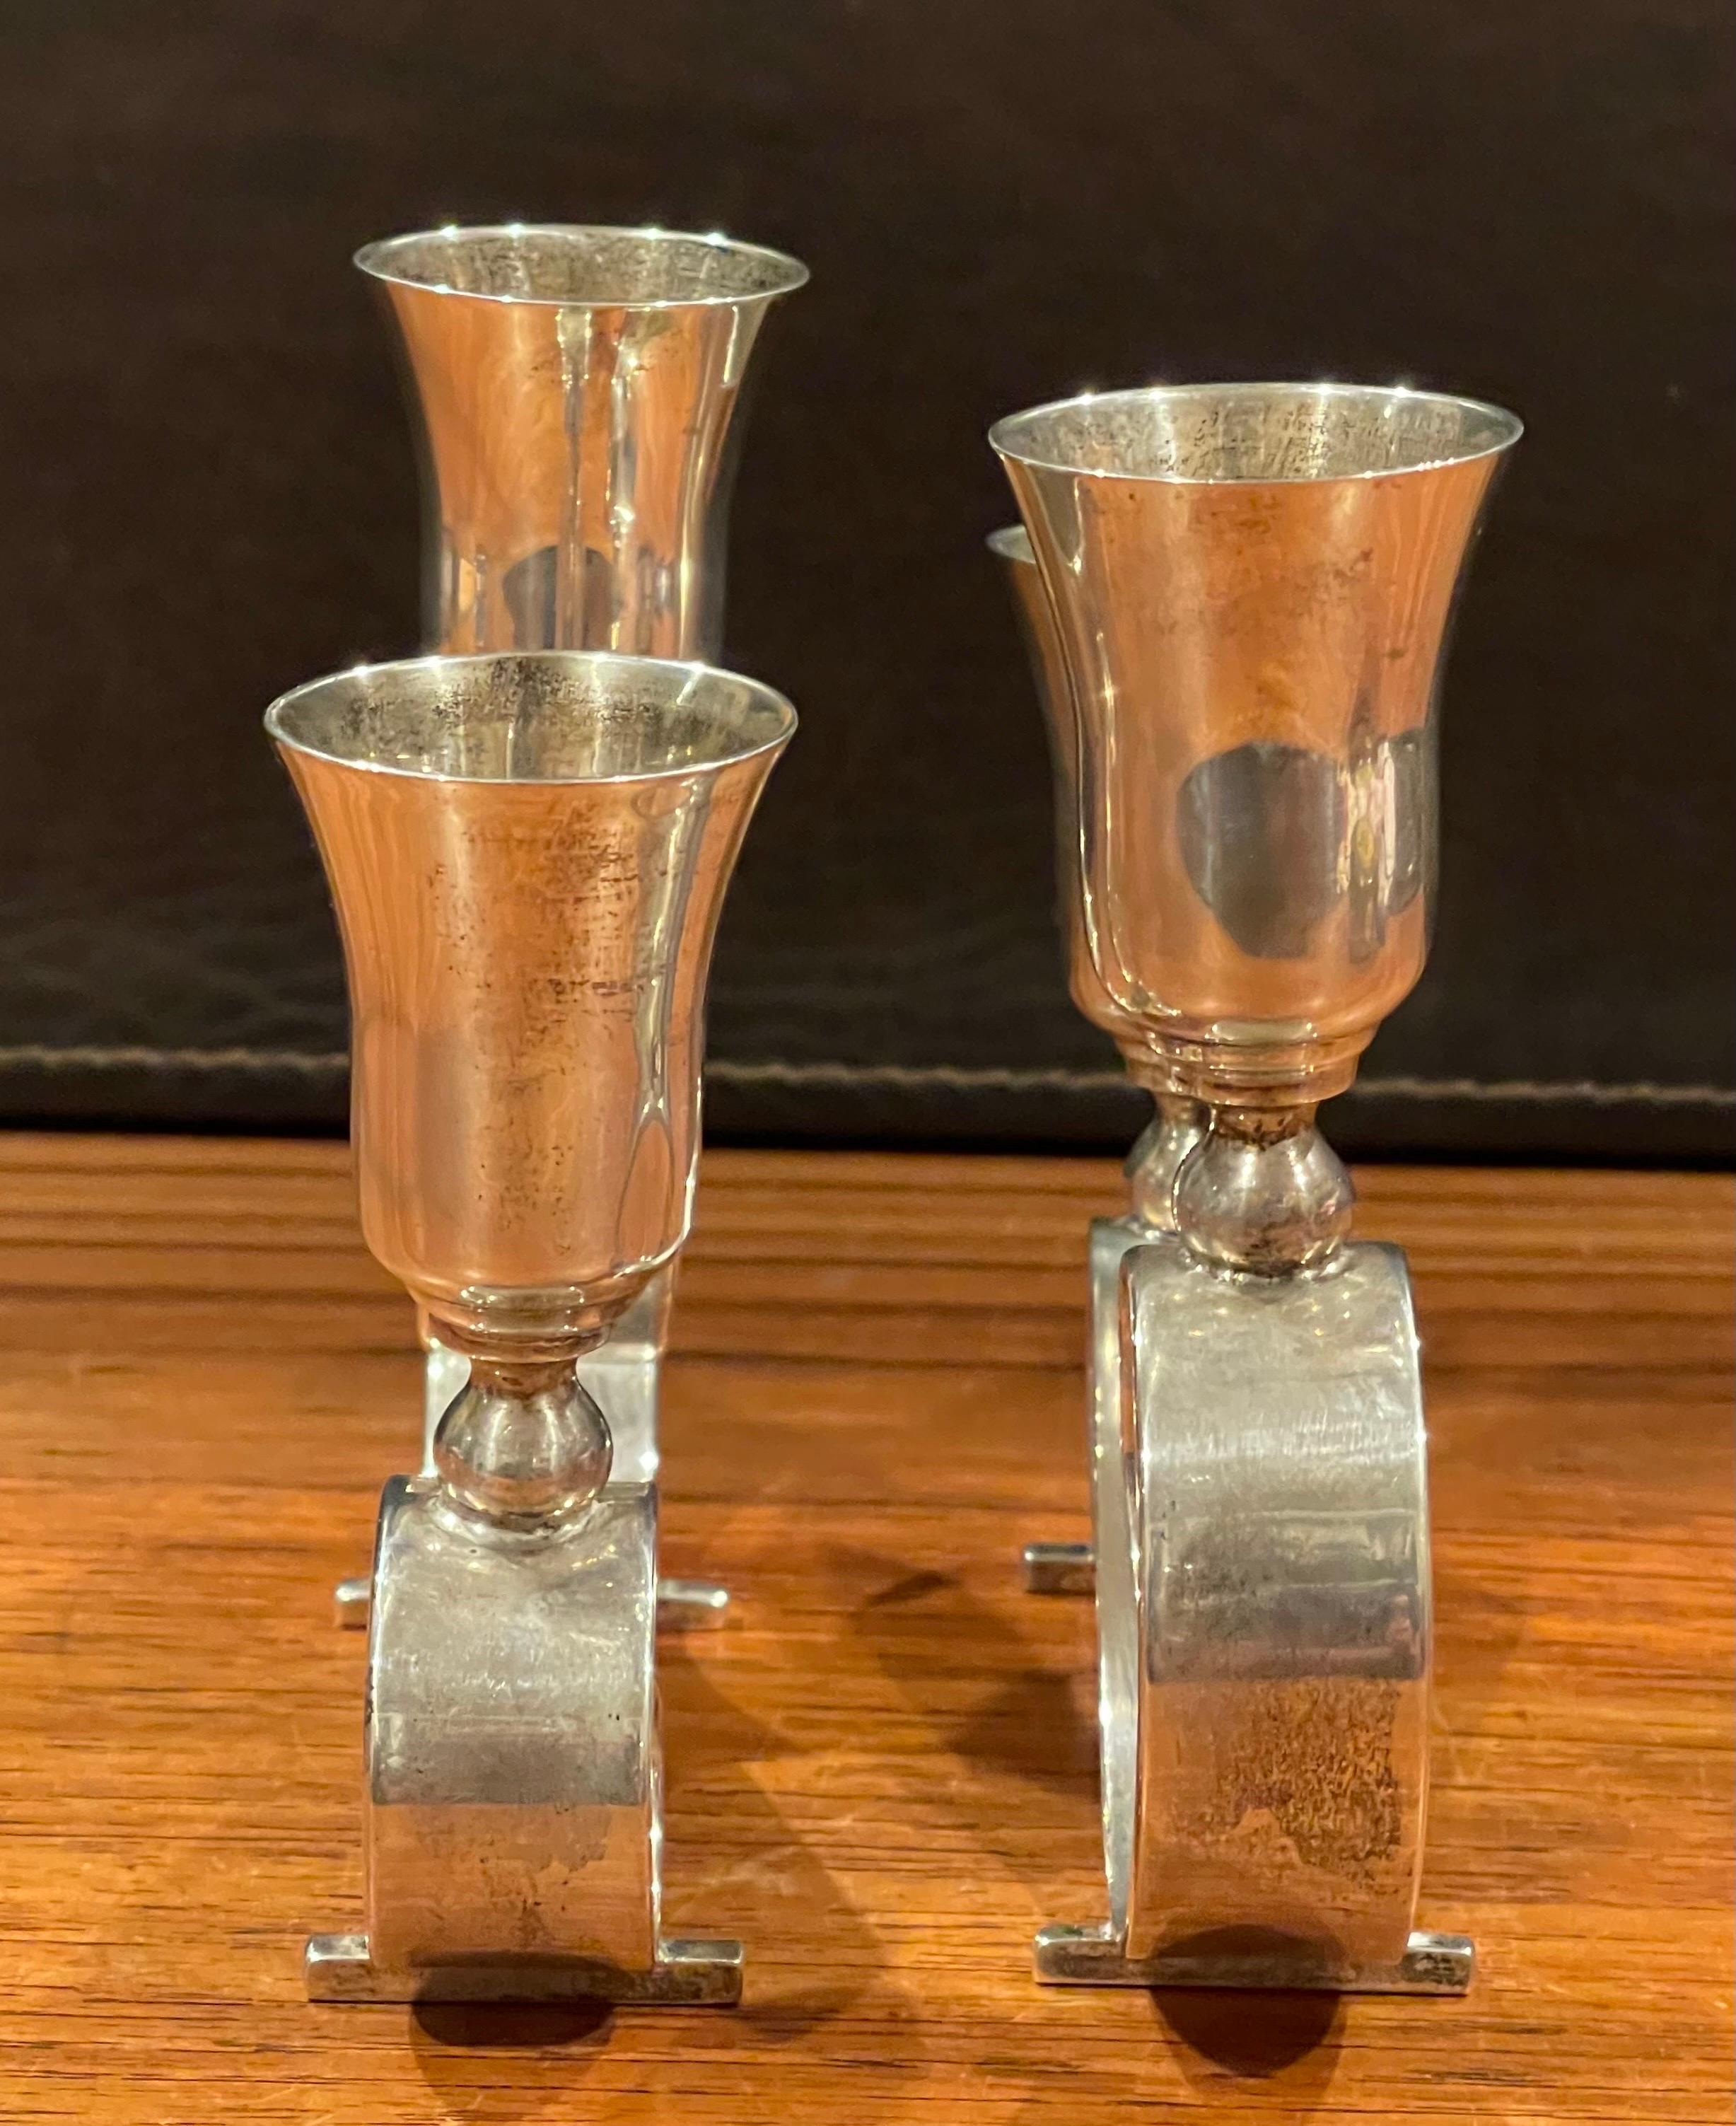 20th Century Pair of MCM Modernist Sterling Silver Candleholders by Juvento Lopez Reyes For Sale